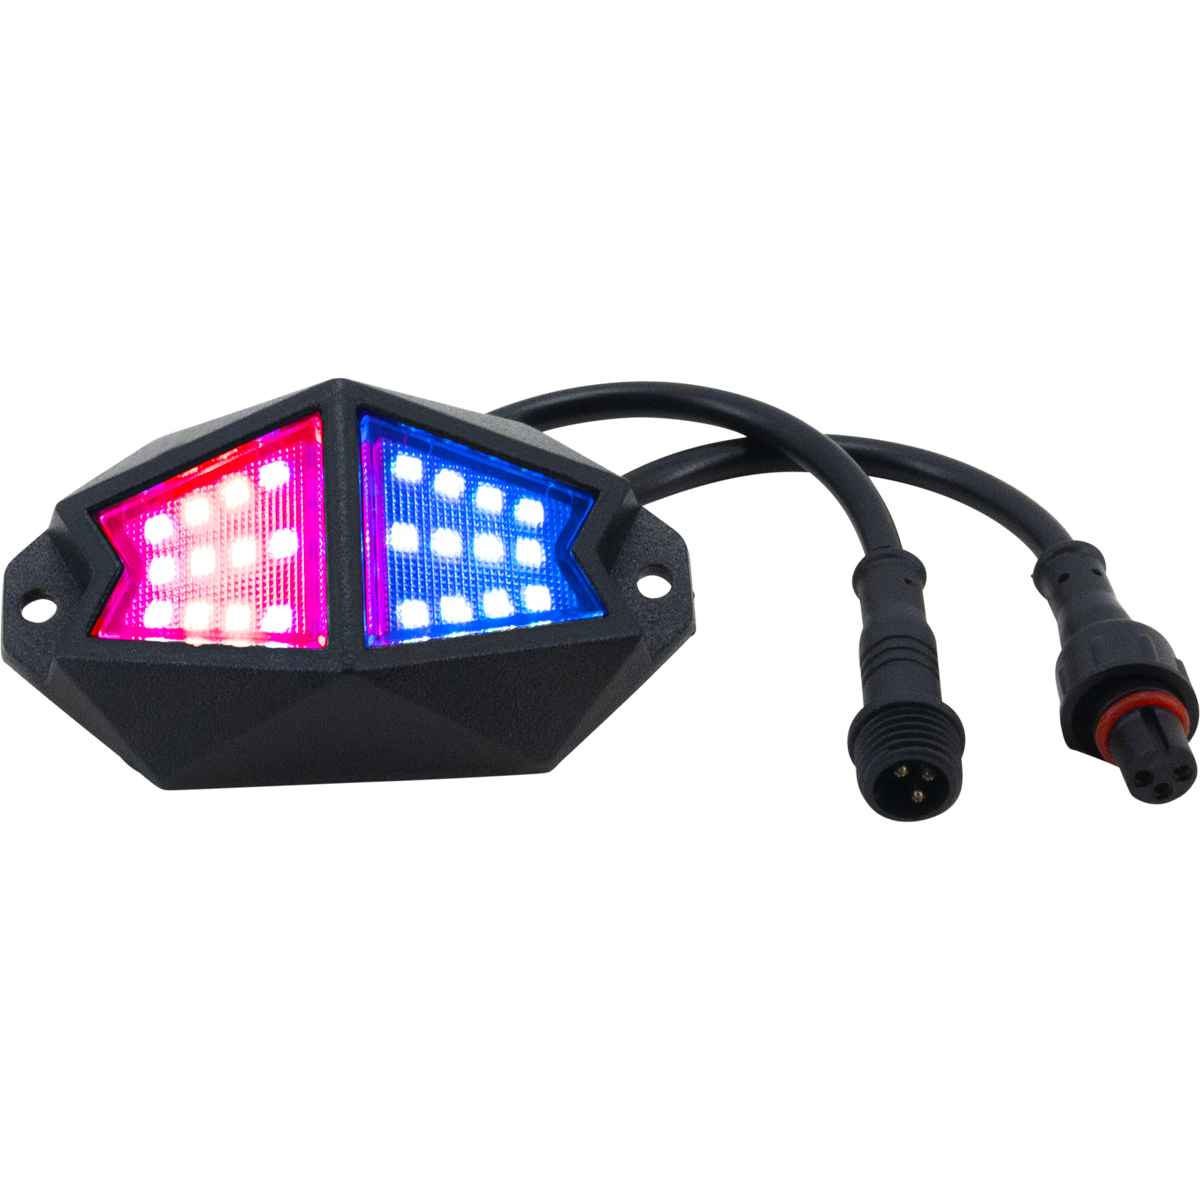 ENLIGHT10 12 Piece RGB Dynamic Rock Light Kit with Bluetooth Remote and On/Off Switch